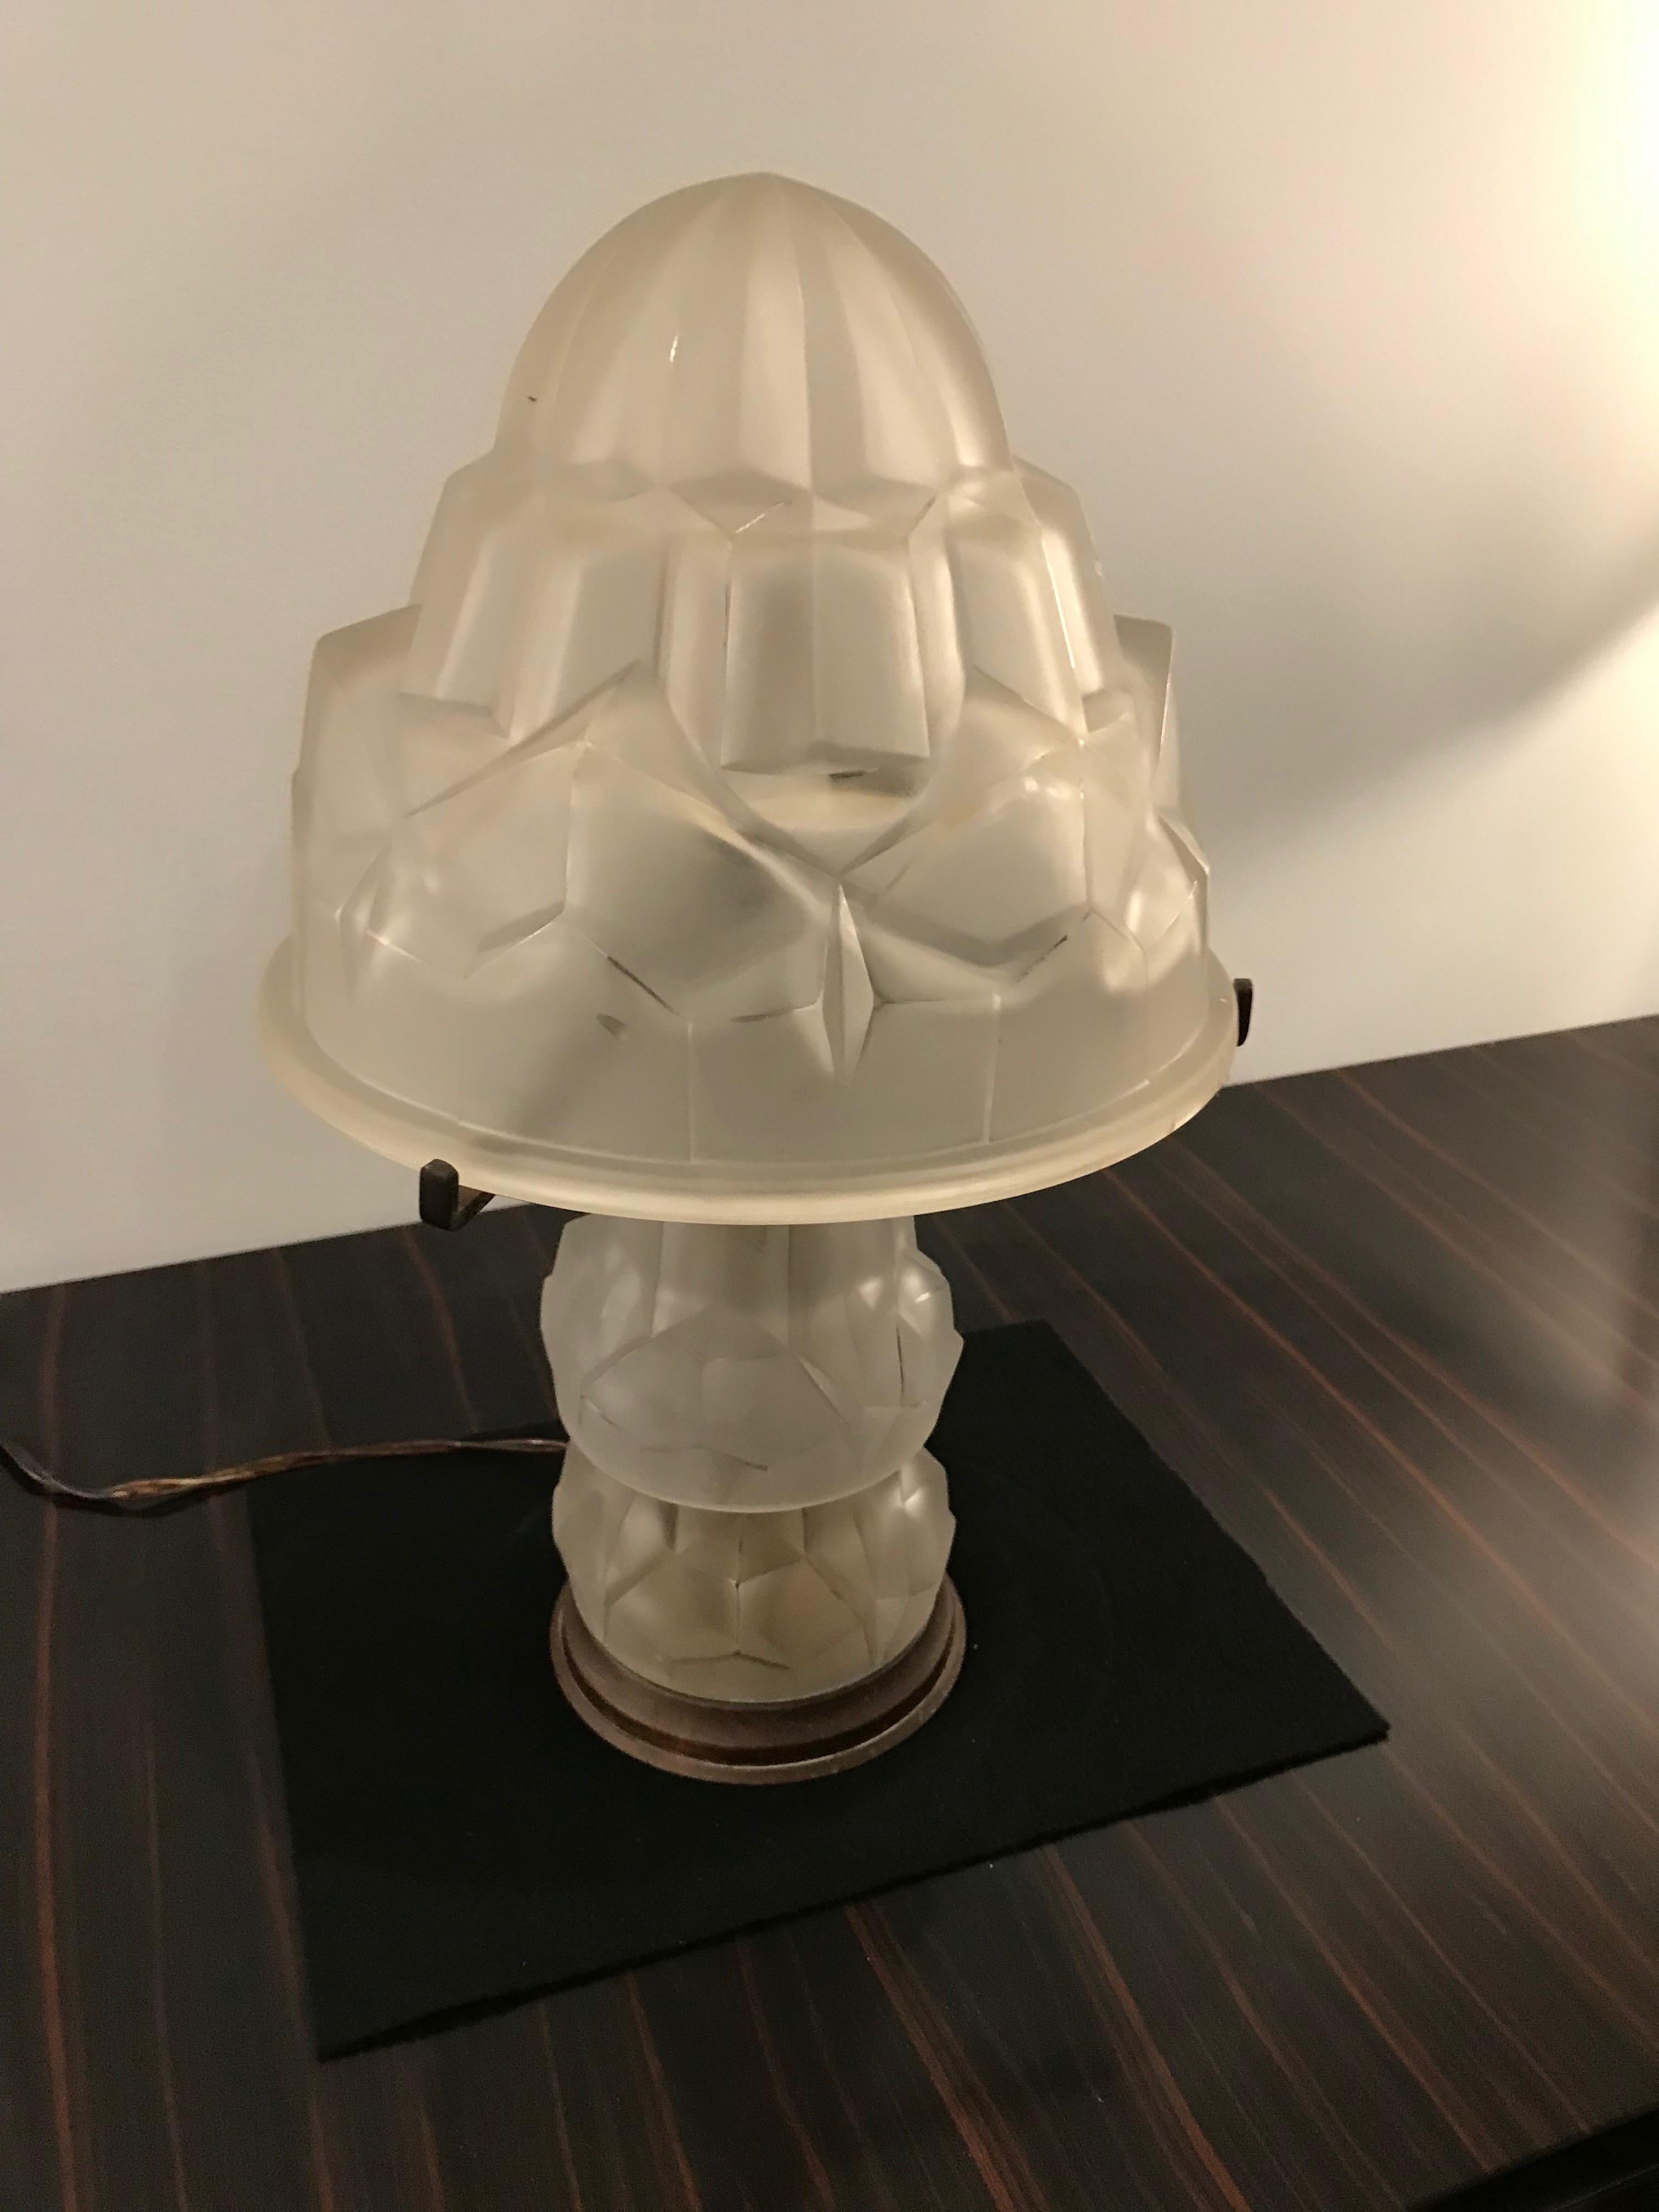 Gorgeous French Art Deco desk / table lamp by Degue. Having geometric shade in frosted glass with polished details. Held by matching glass center shaft that also lights. Has been rewired for American use having two candelabra socket. With a max watt